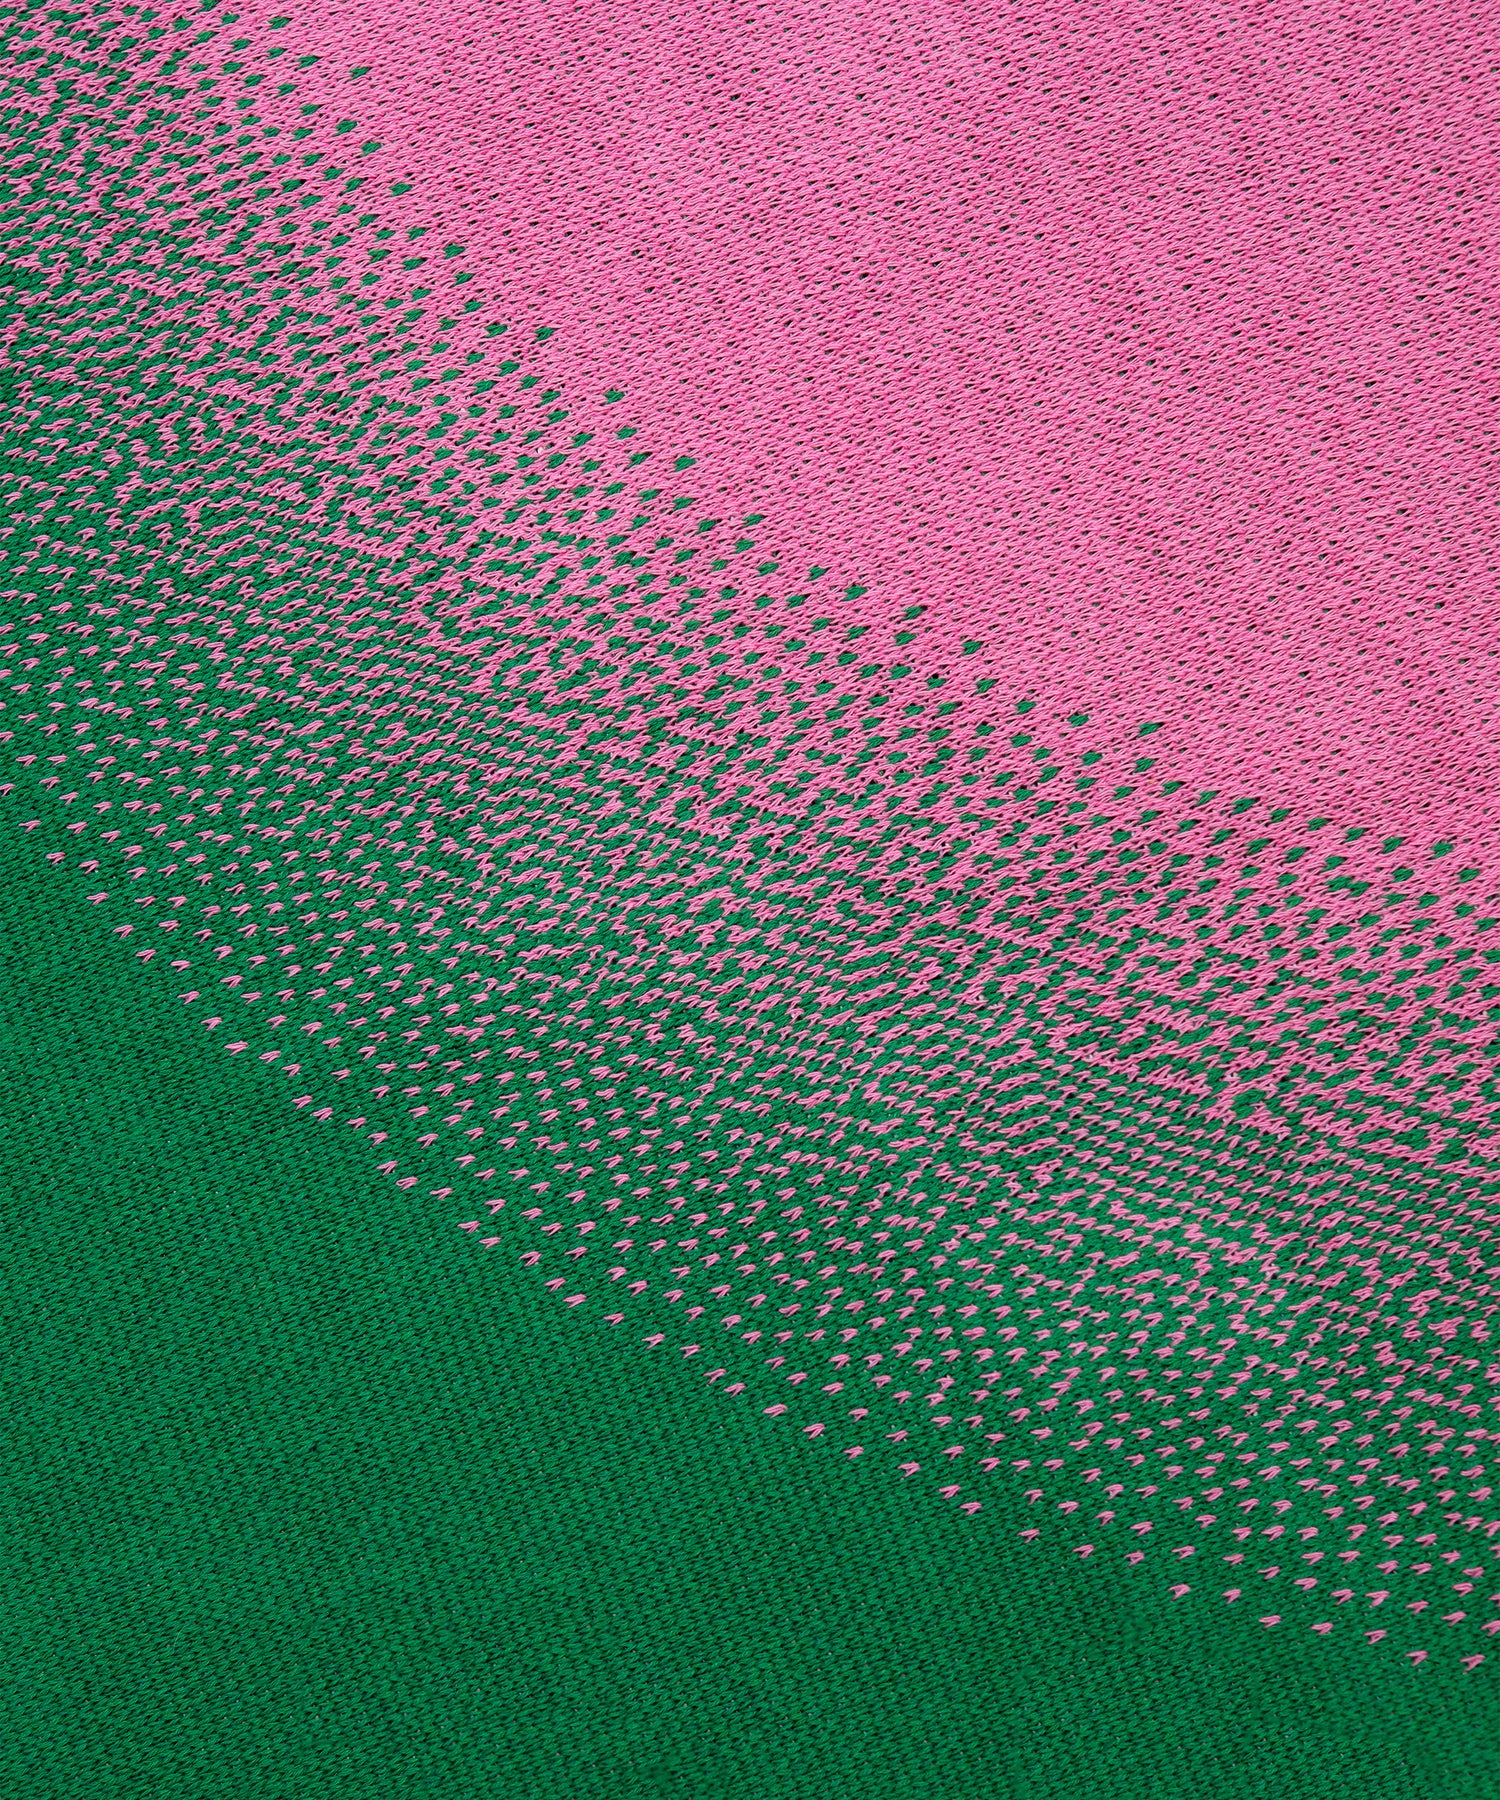 Close up image of Burst Blanket showing the stitching of pink circle going into green background.